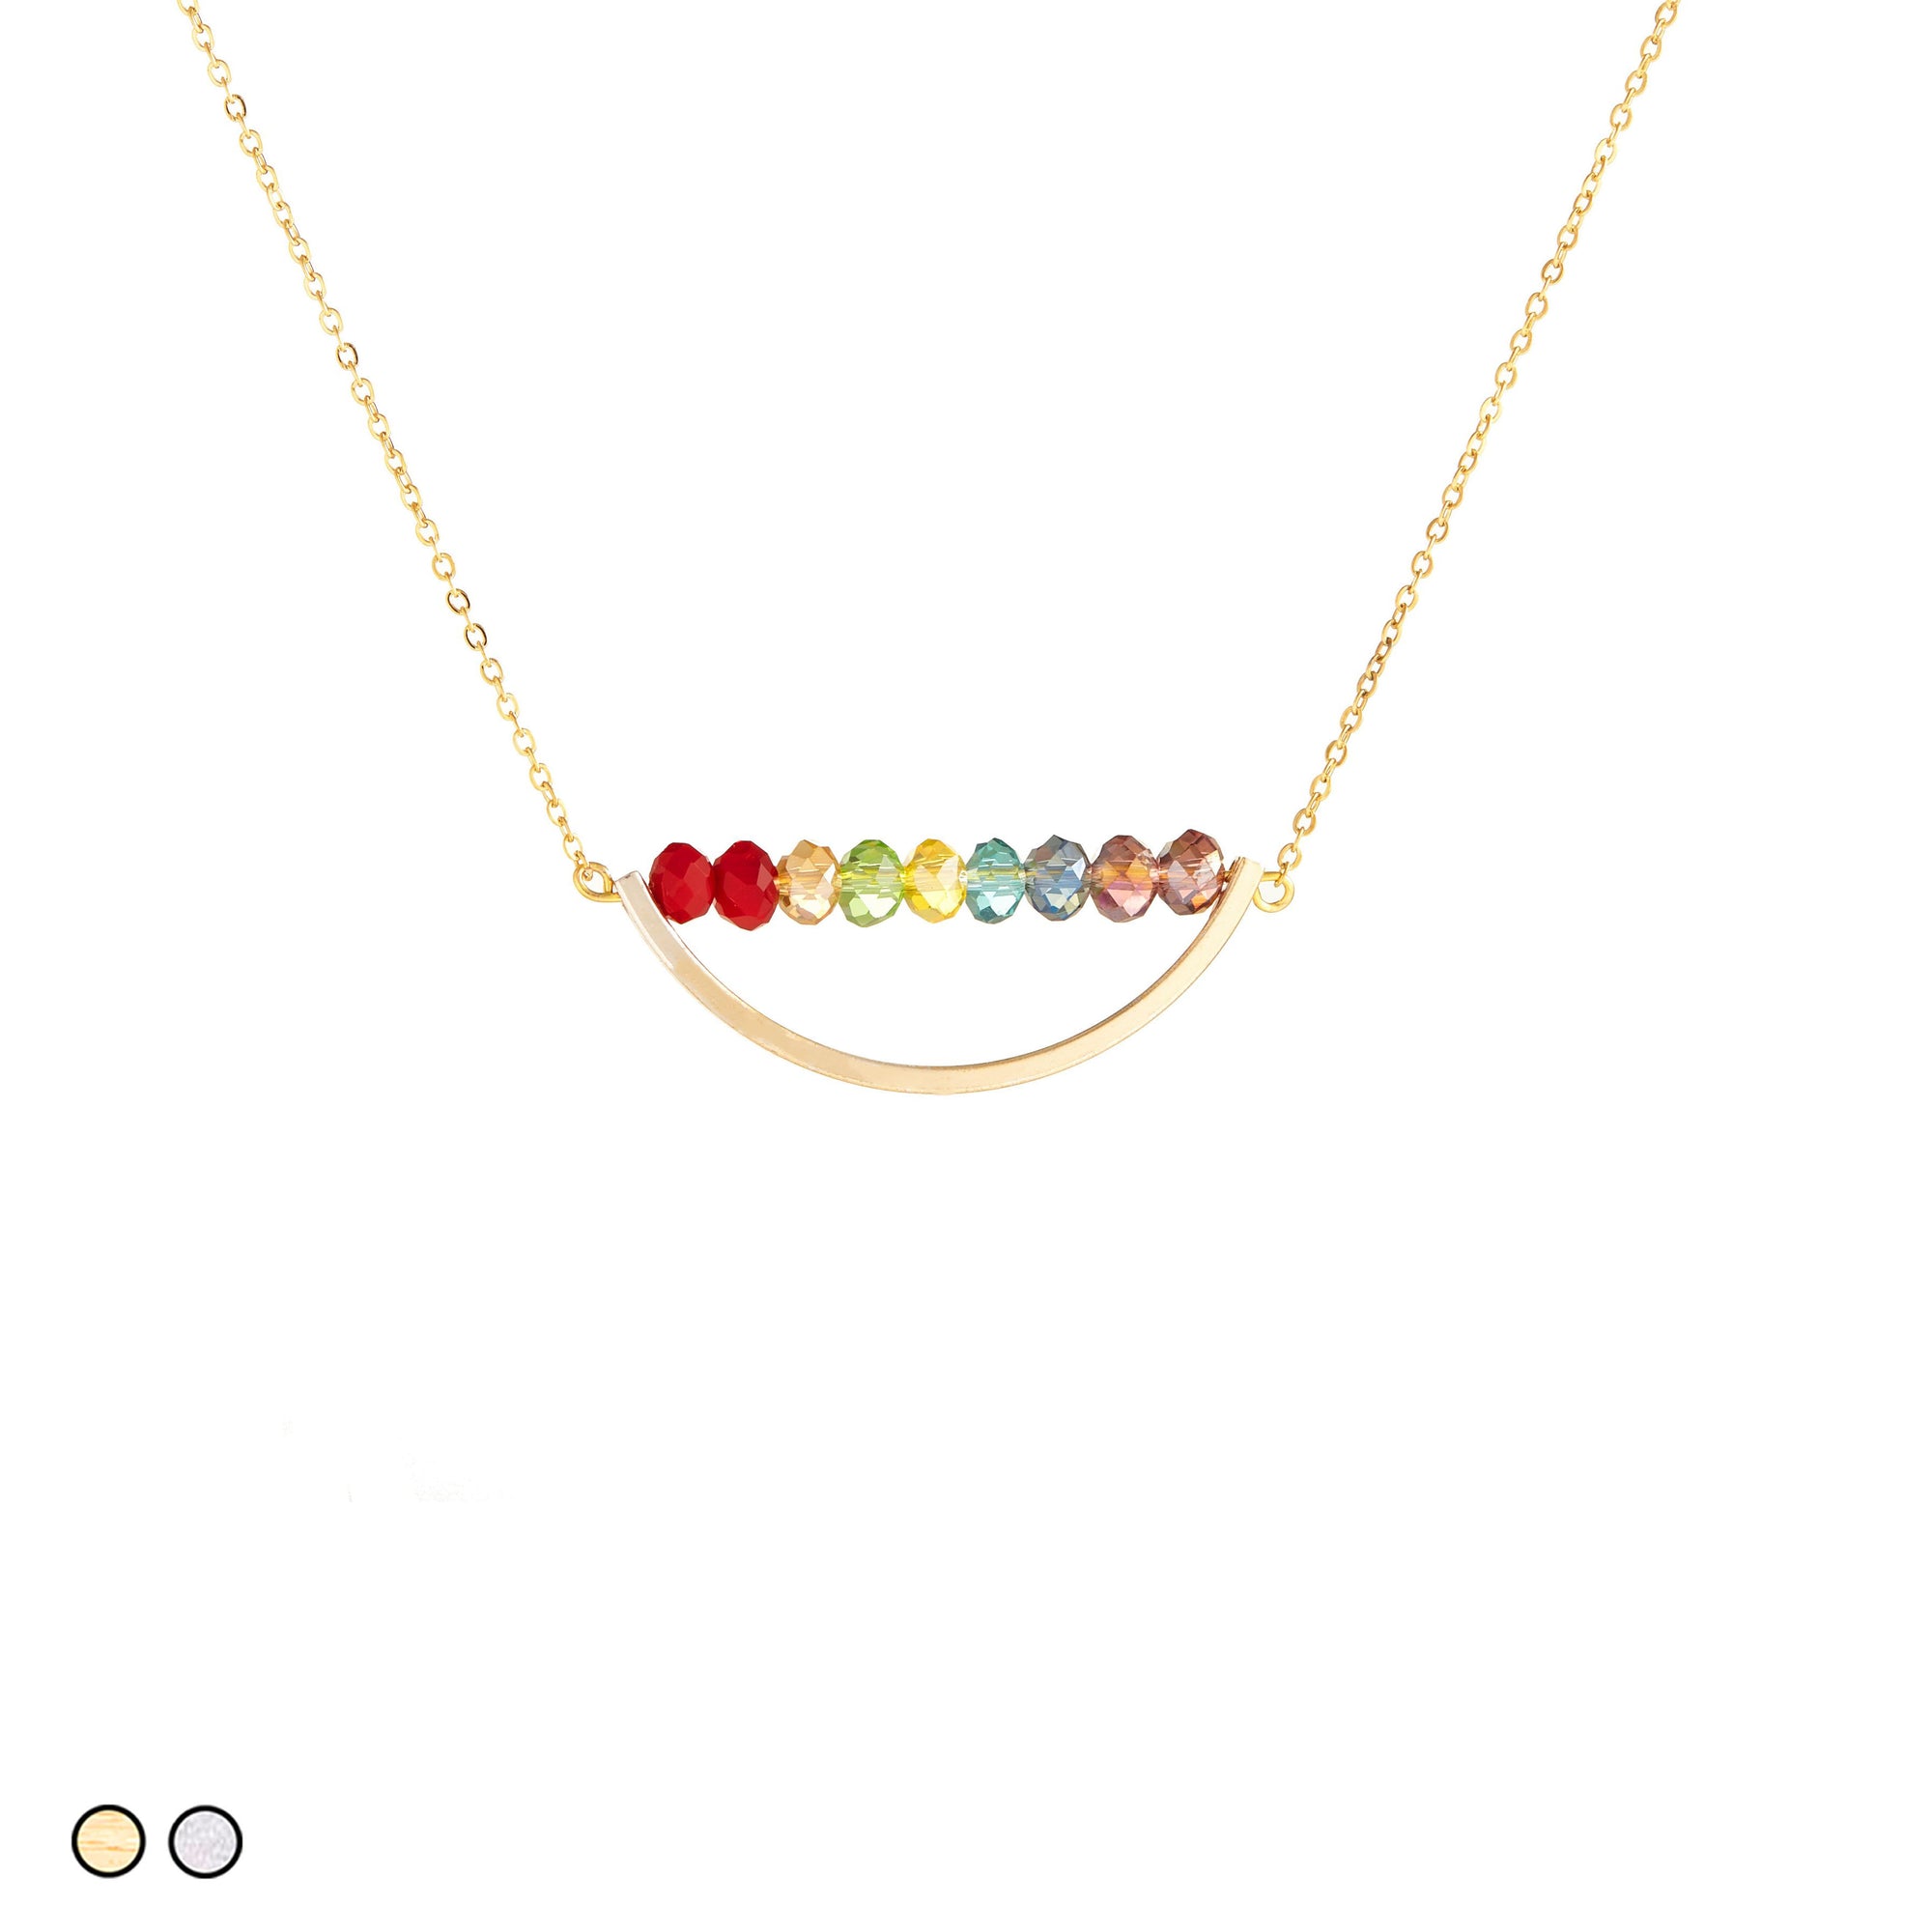 Chakra Rainbow Stones with Arch (Gold and Silver)